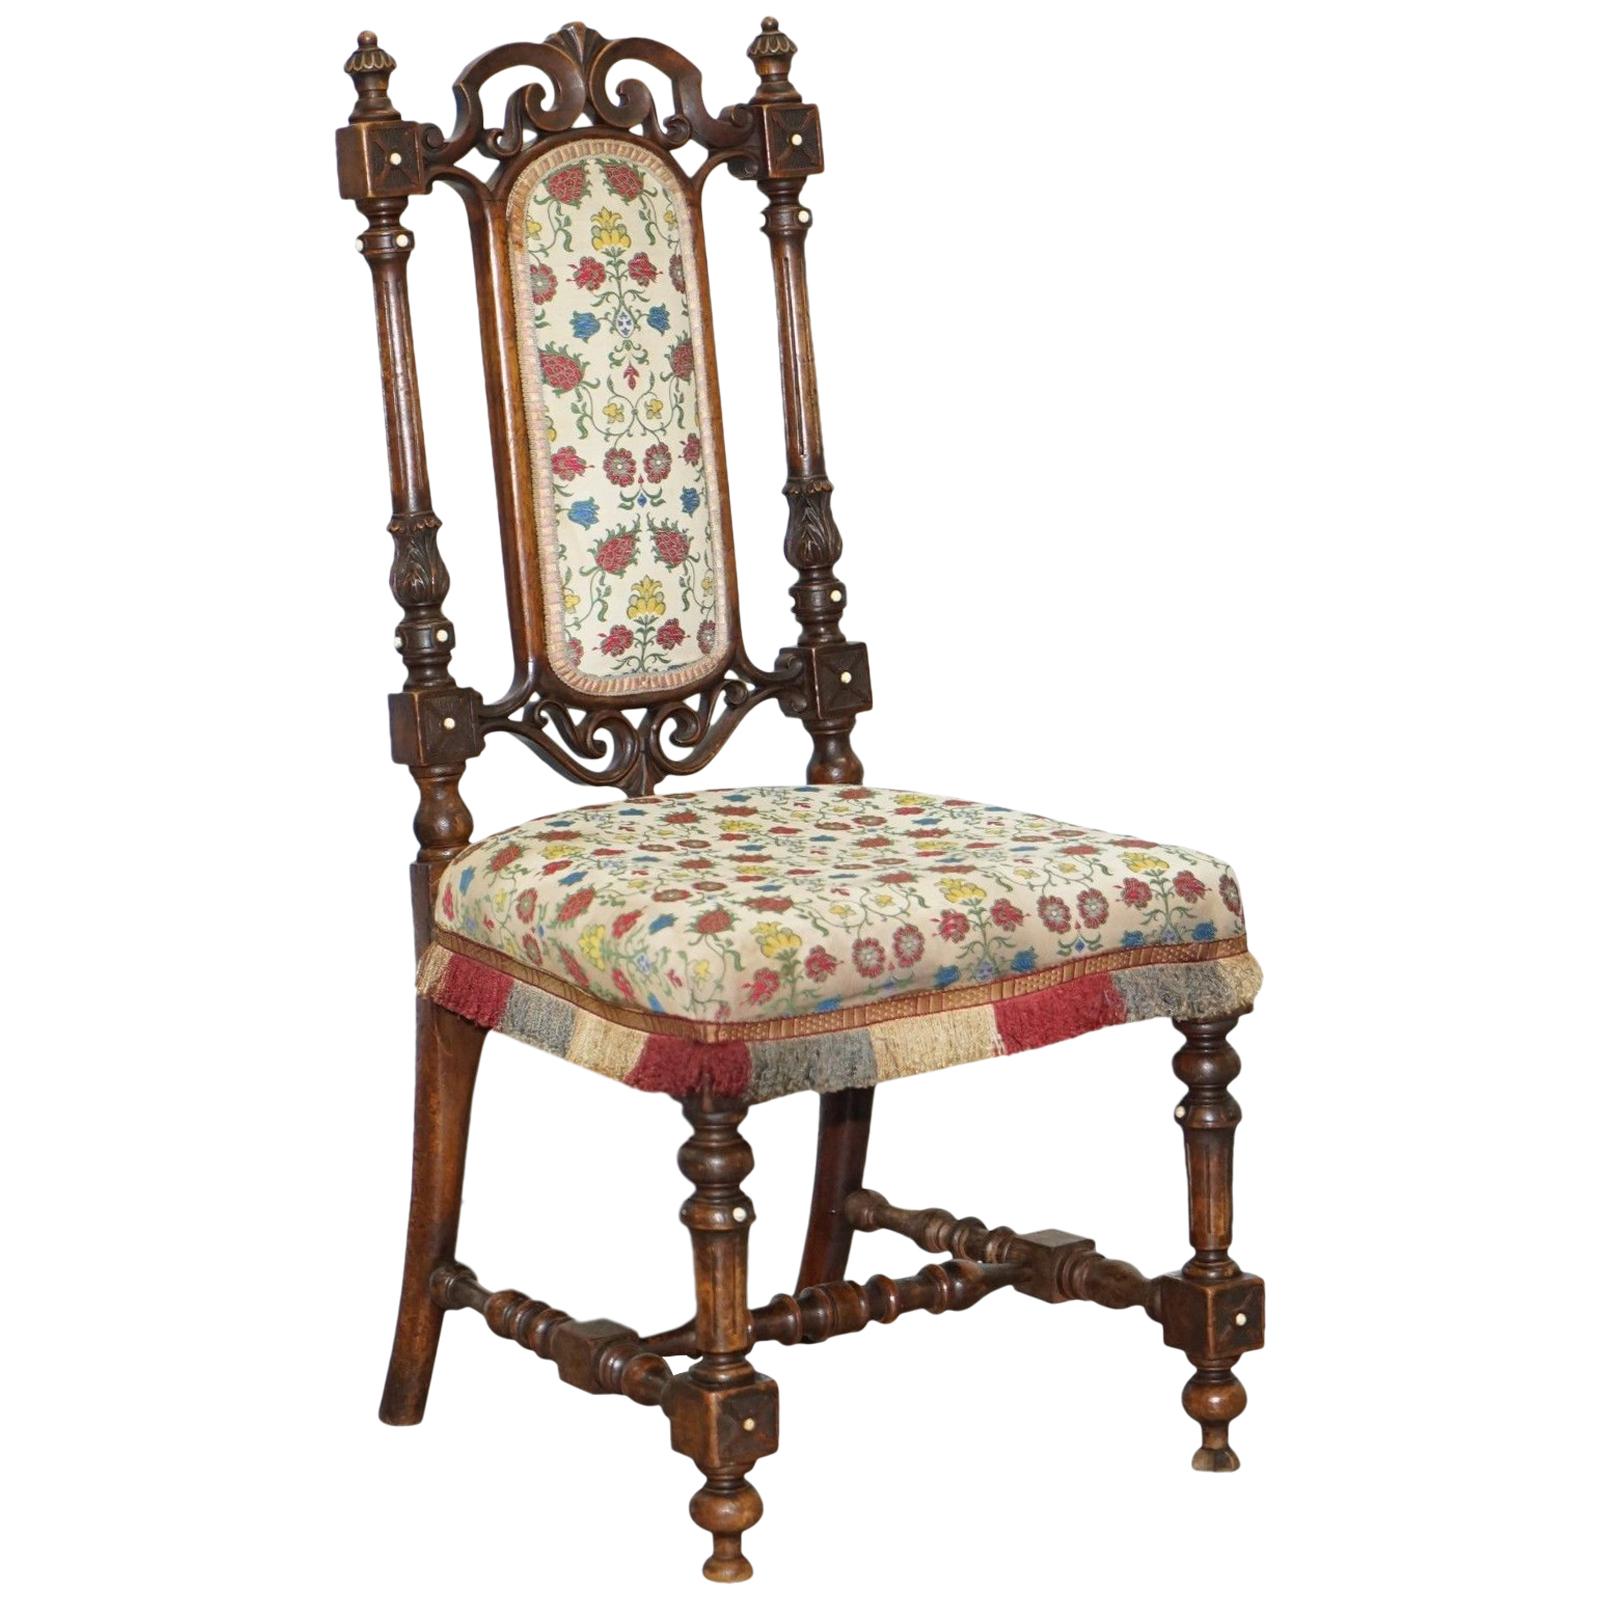 Early Georgian Single Chair Highly Carved and Detailing Walnut, circa 1800